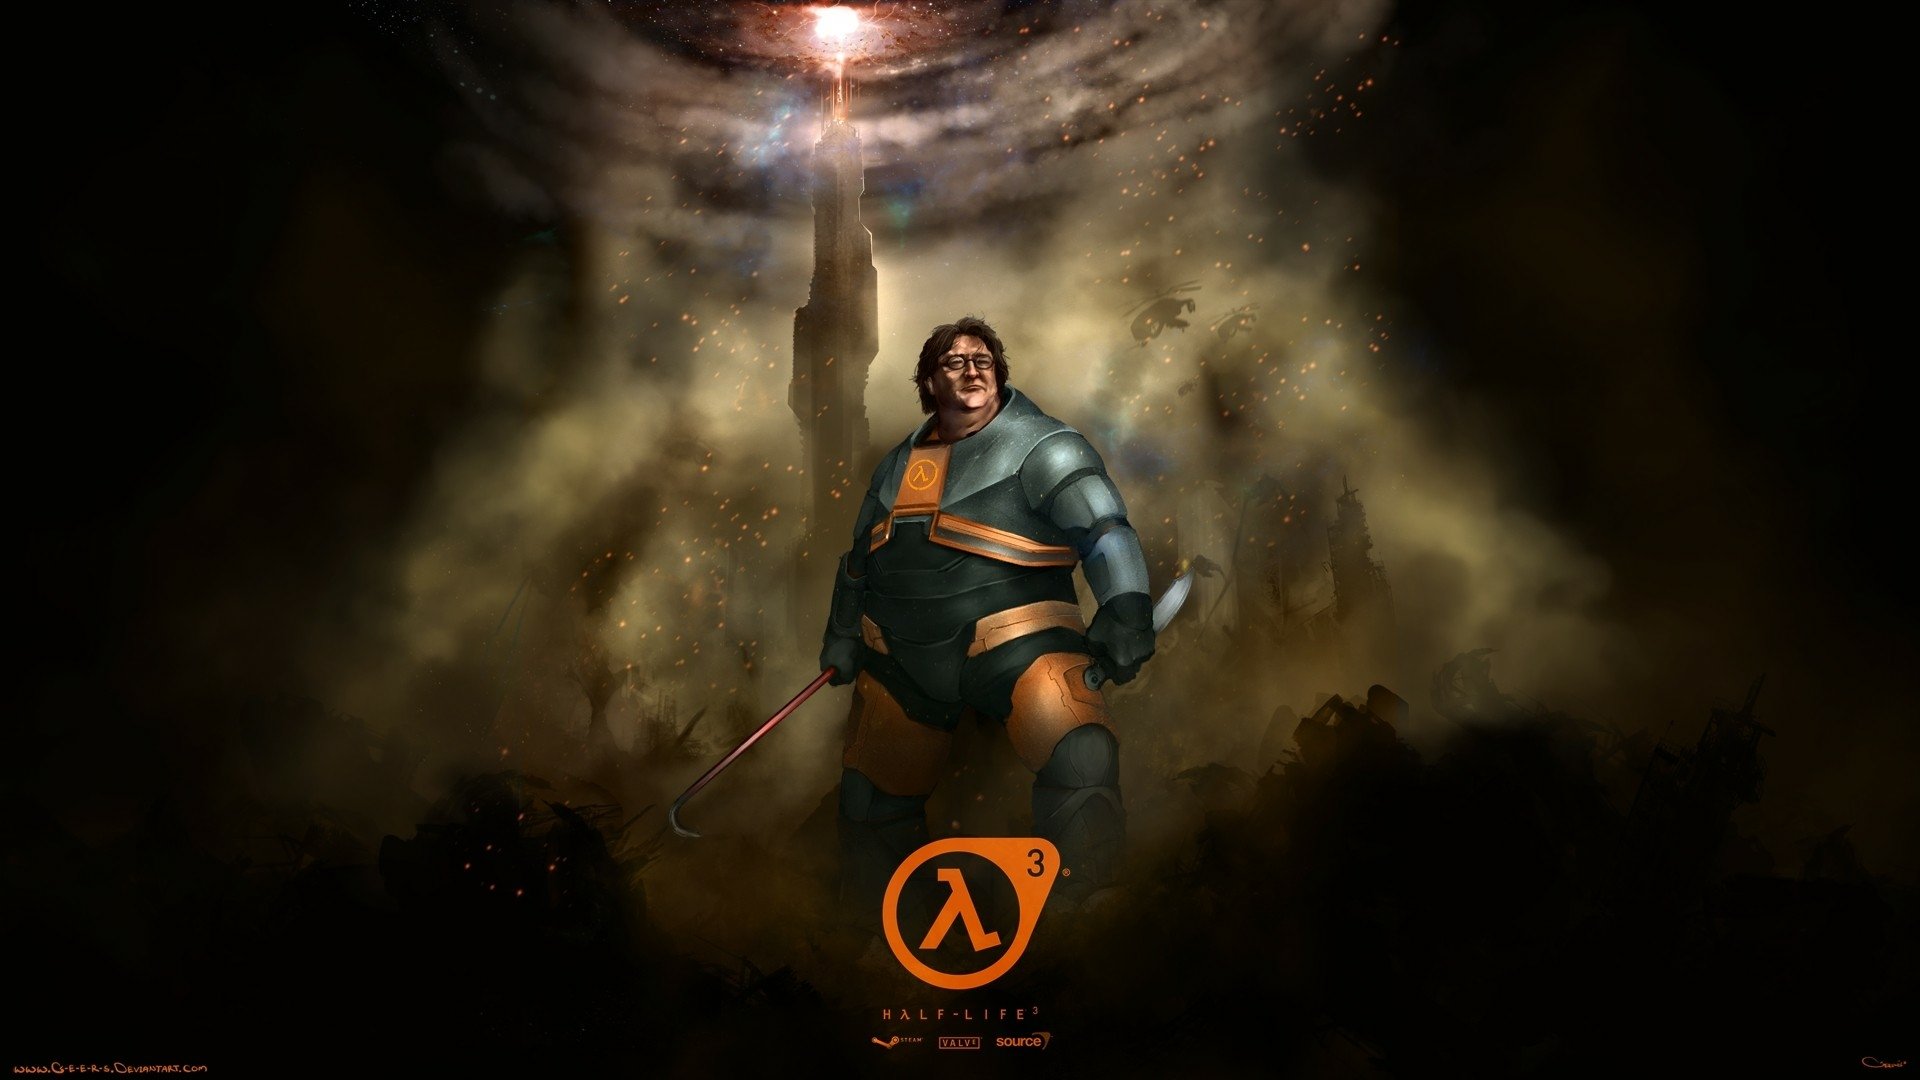 Wallpaper : Valve Corporation, Portal game, video games 1920x1080 - Drowned  - 1390233 - HD Wallpapers - WallHere